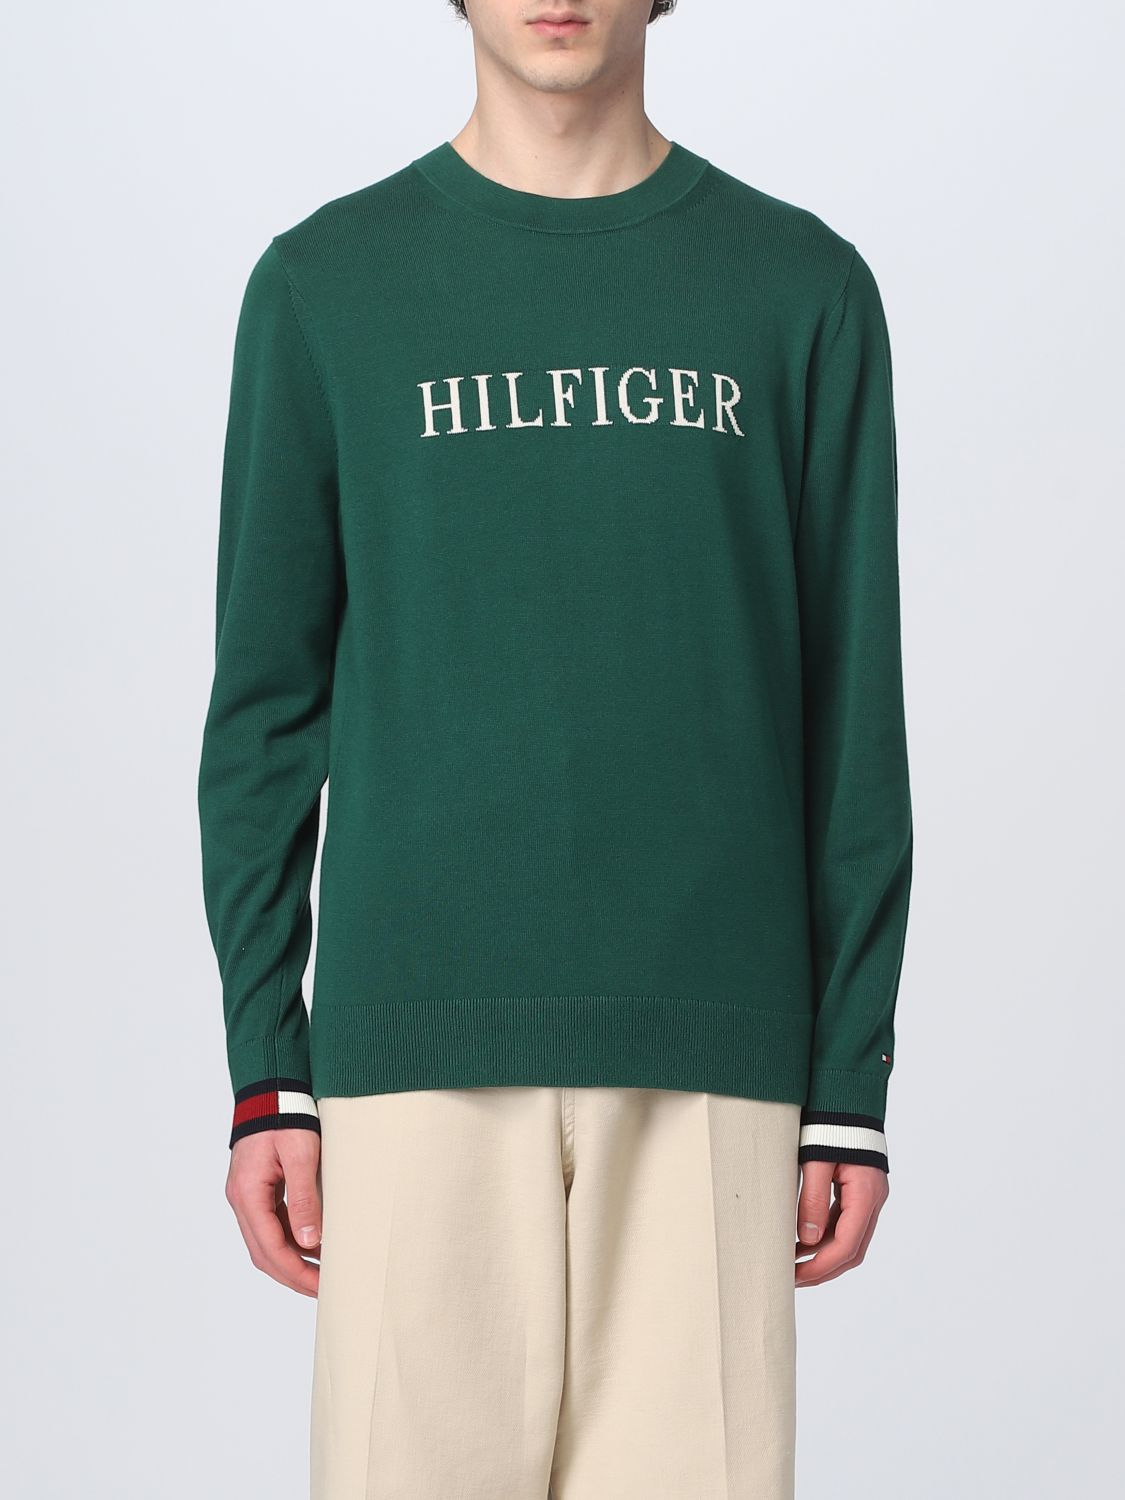 TOMMY HILFIGER: for man - Green